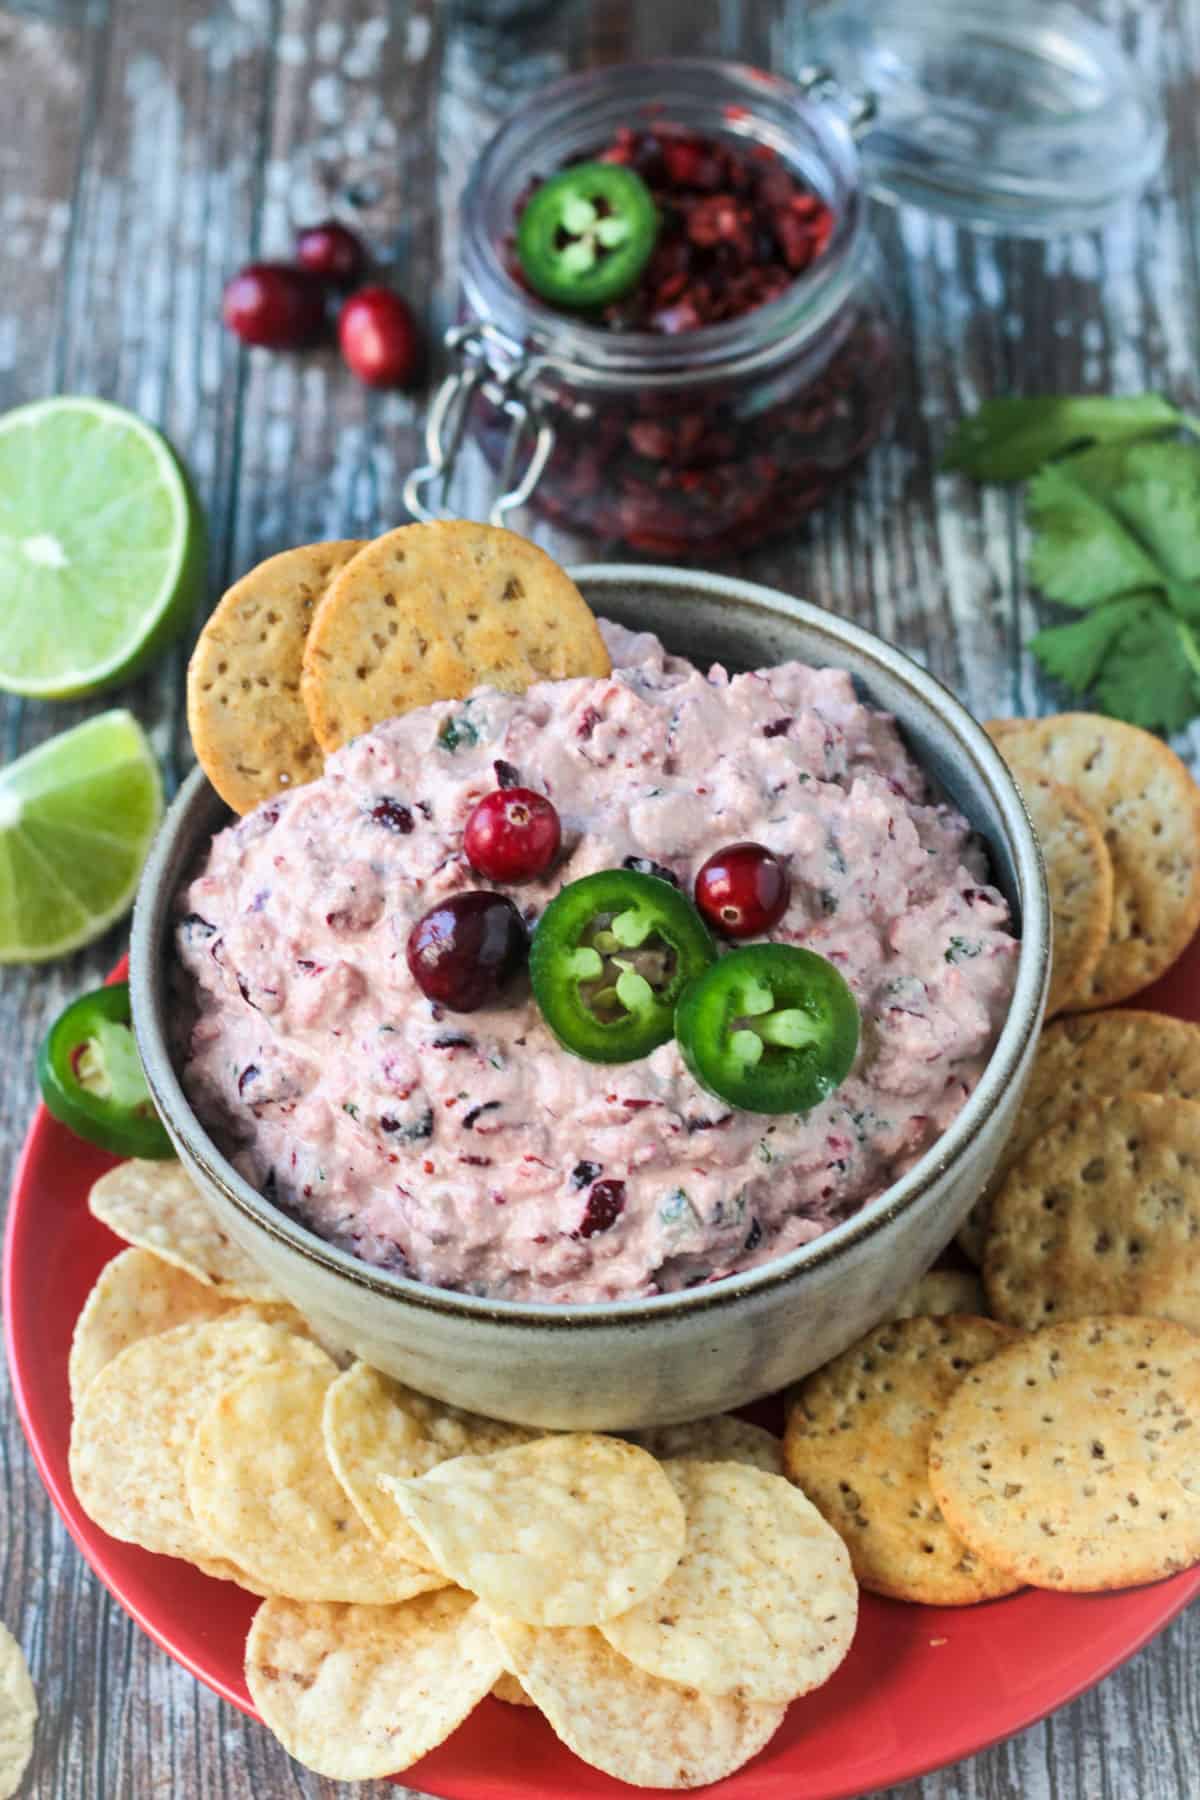 Two crackers dipped into a bowl of cranberry dip.